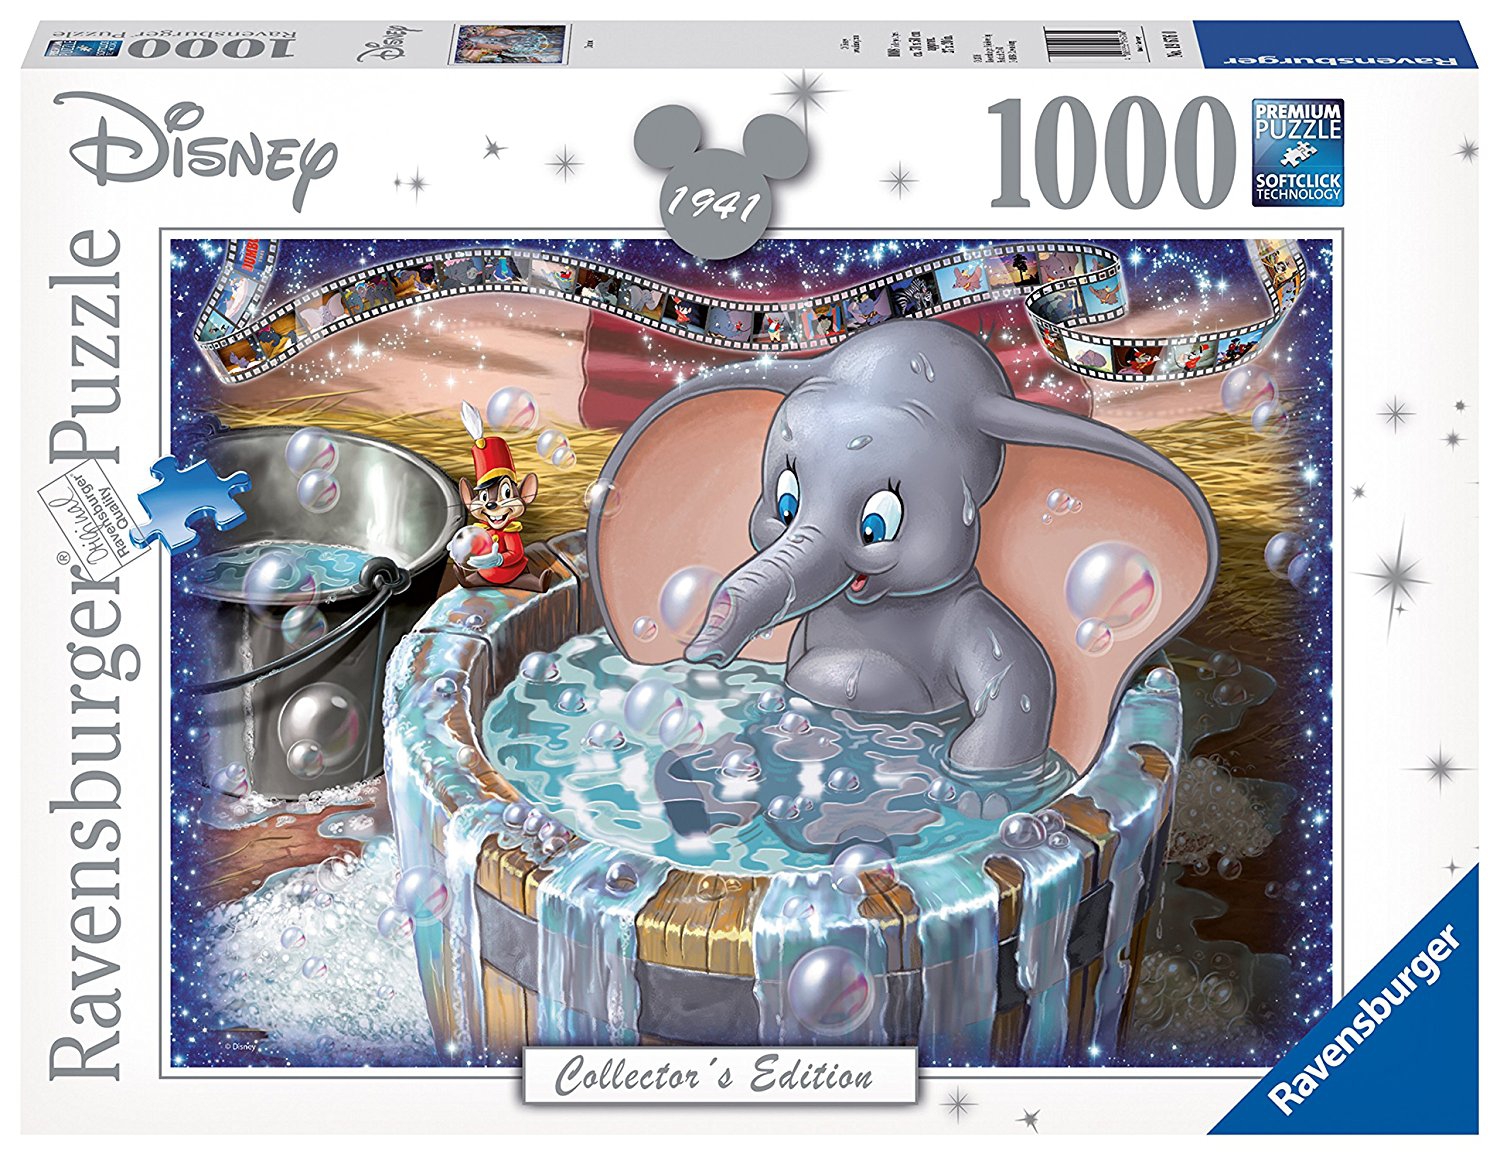 Disney Collector'S Edition ' Dumbo' 1000 Piece Jigsaw Puzzle Game